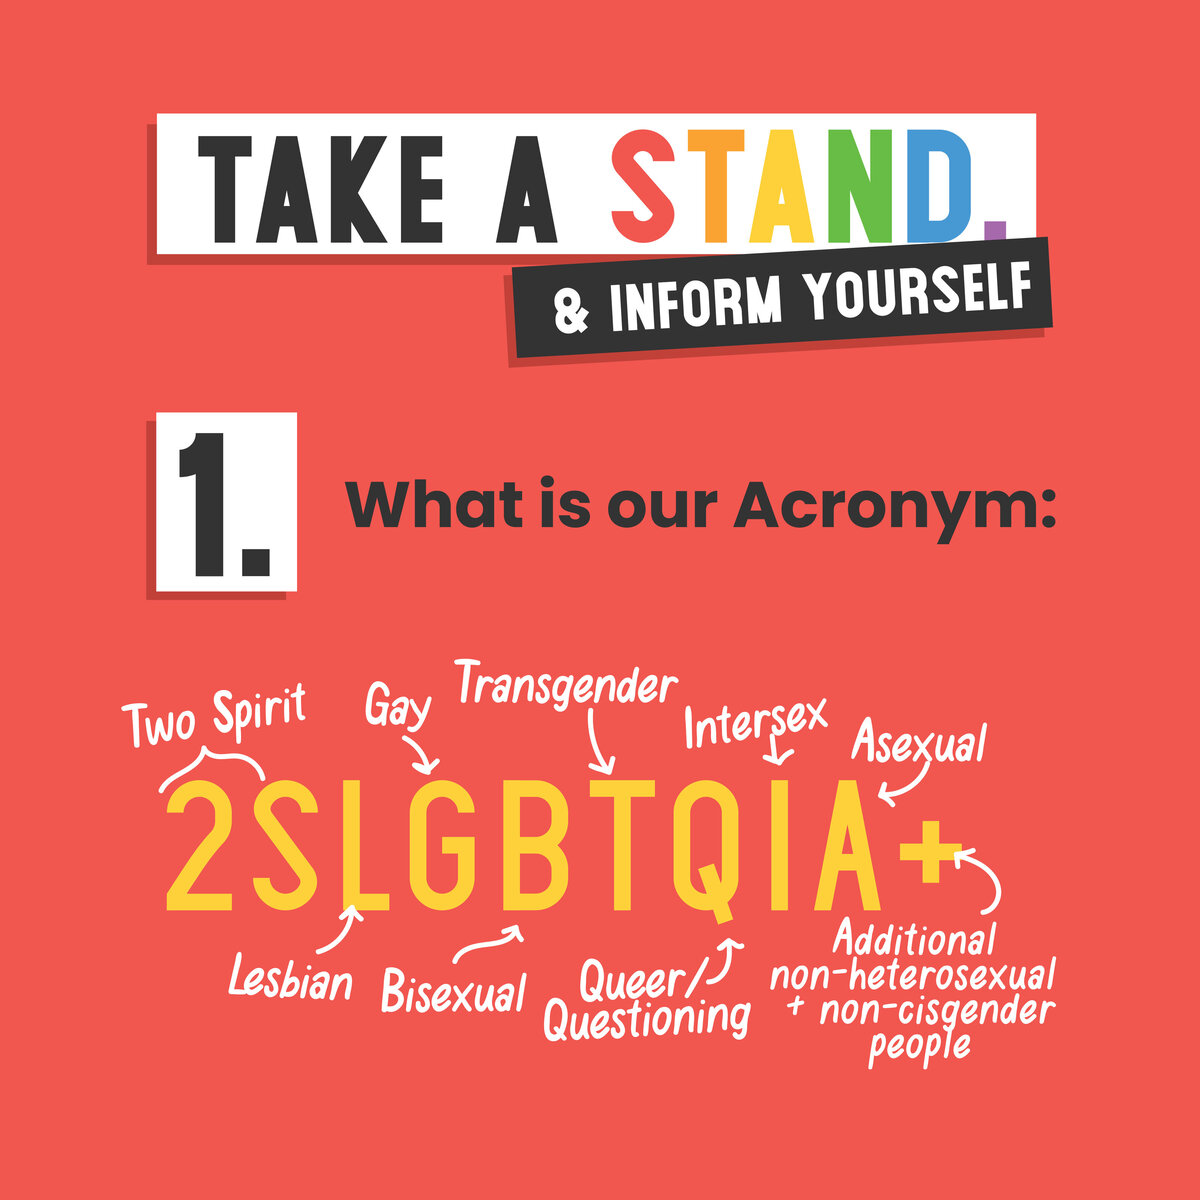 PPEI-IDAHOT-Campaign_Insta inform yourself 1